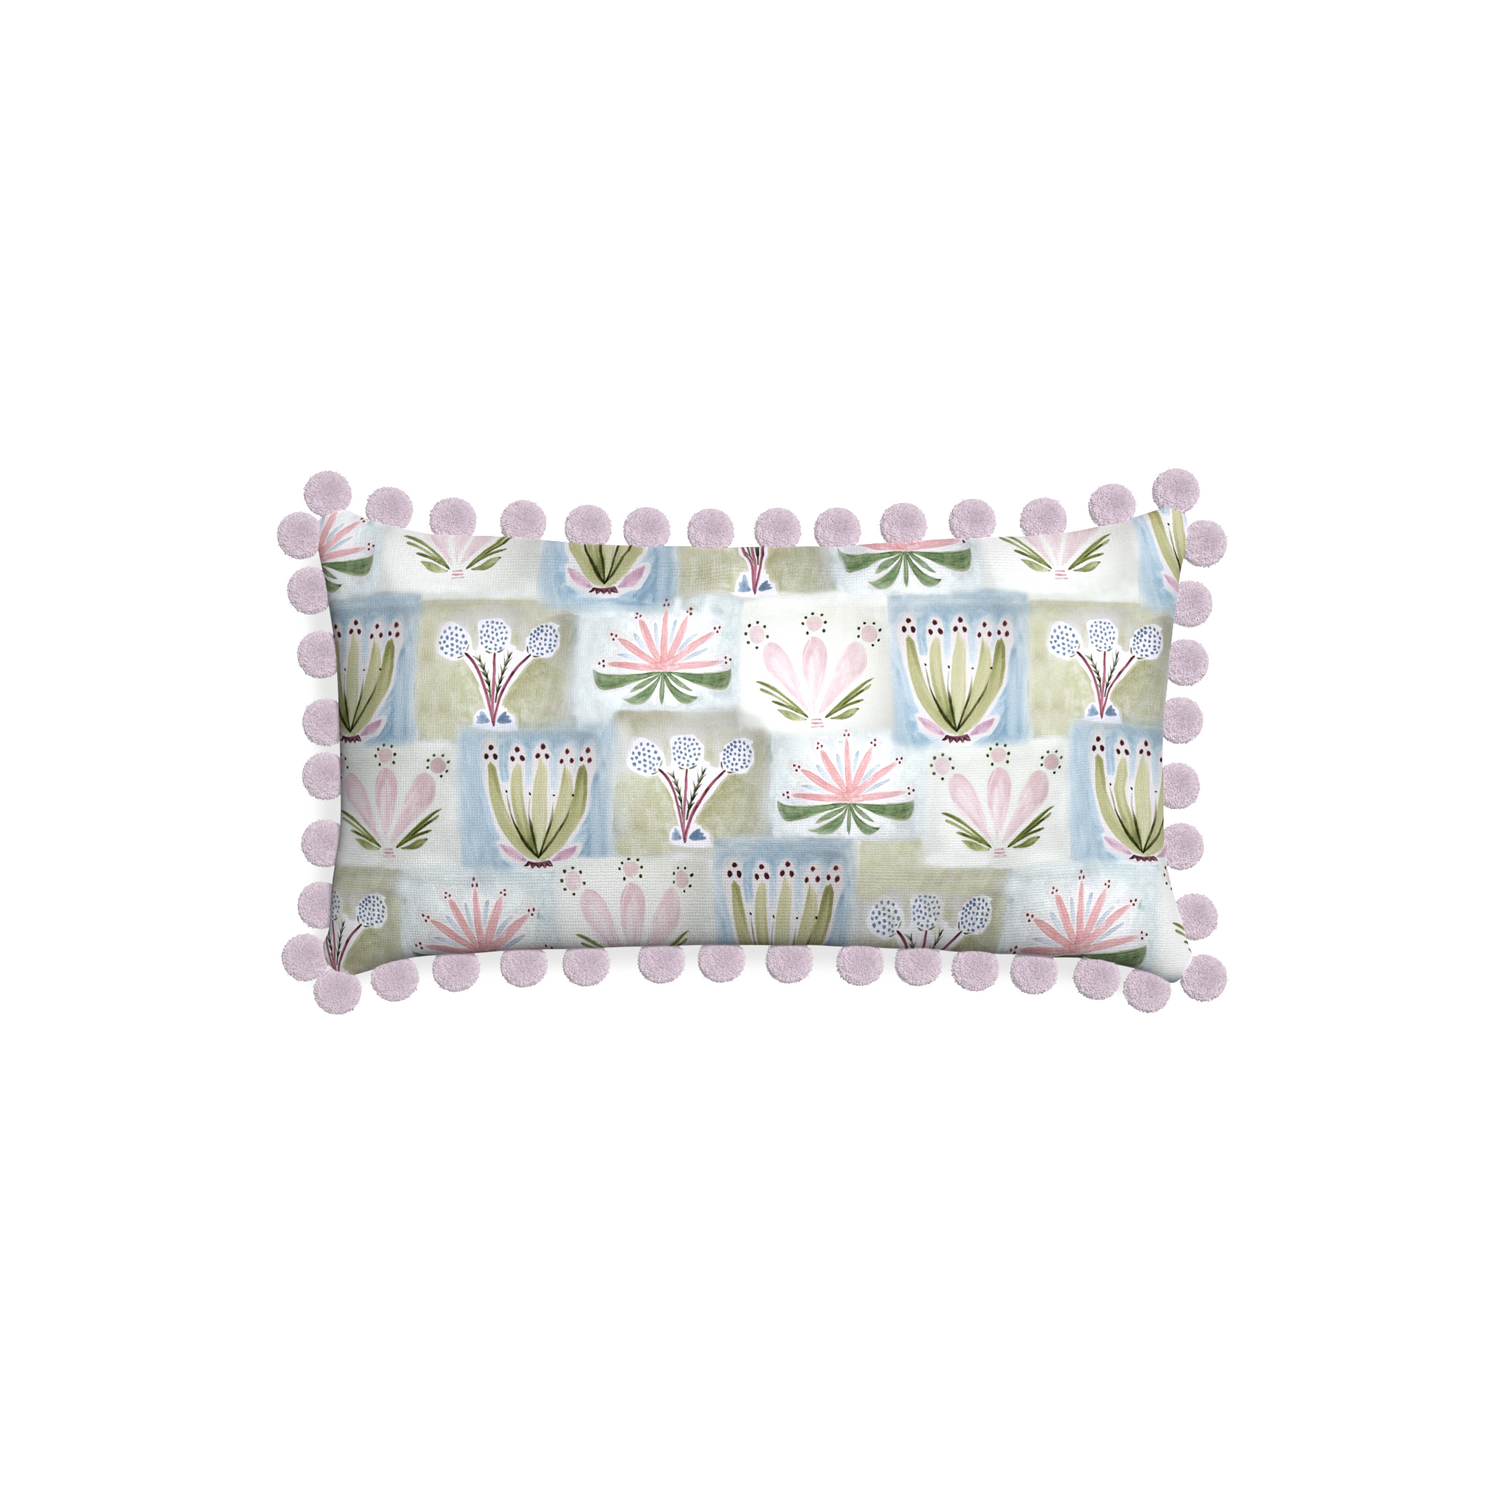 Petite-lumbar harper custom hand-painted floralpillow with l on white background